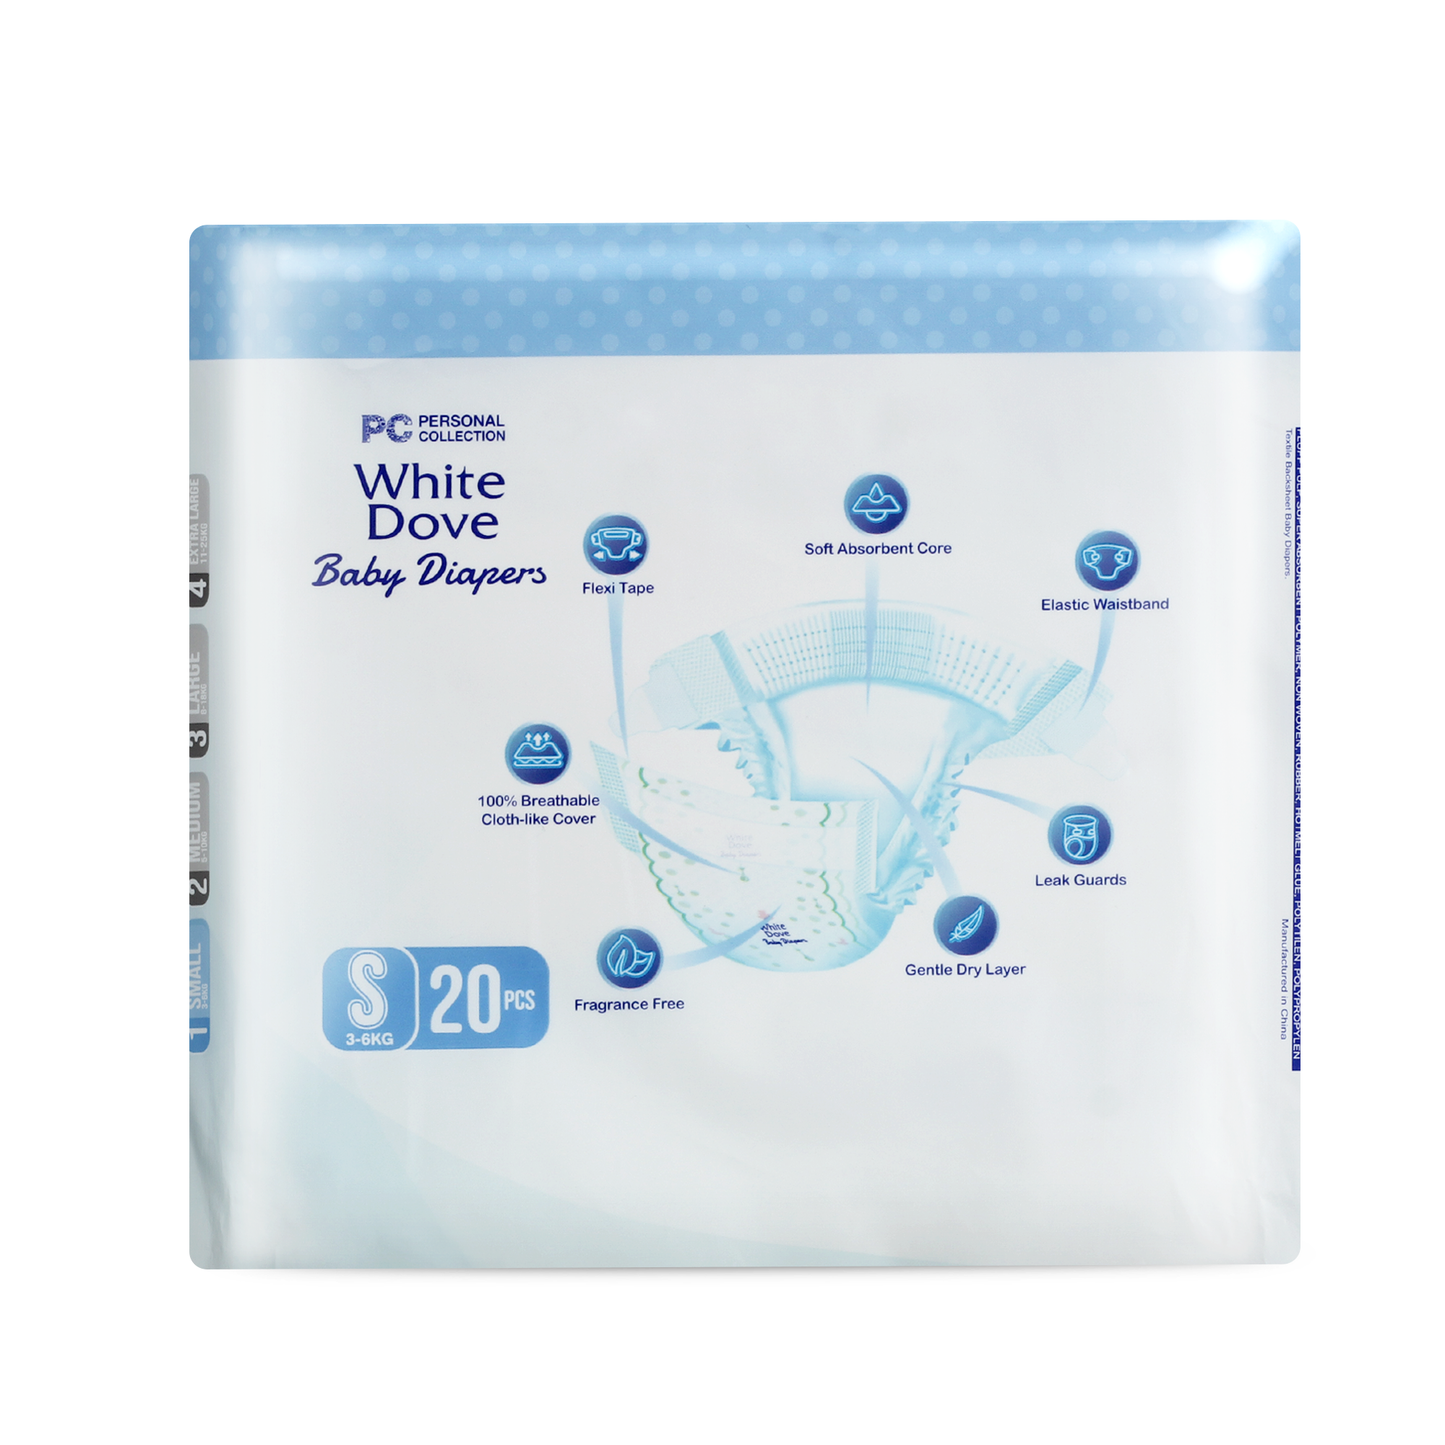 White Dove Baby Diaper Small Pack of 20's